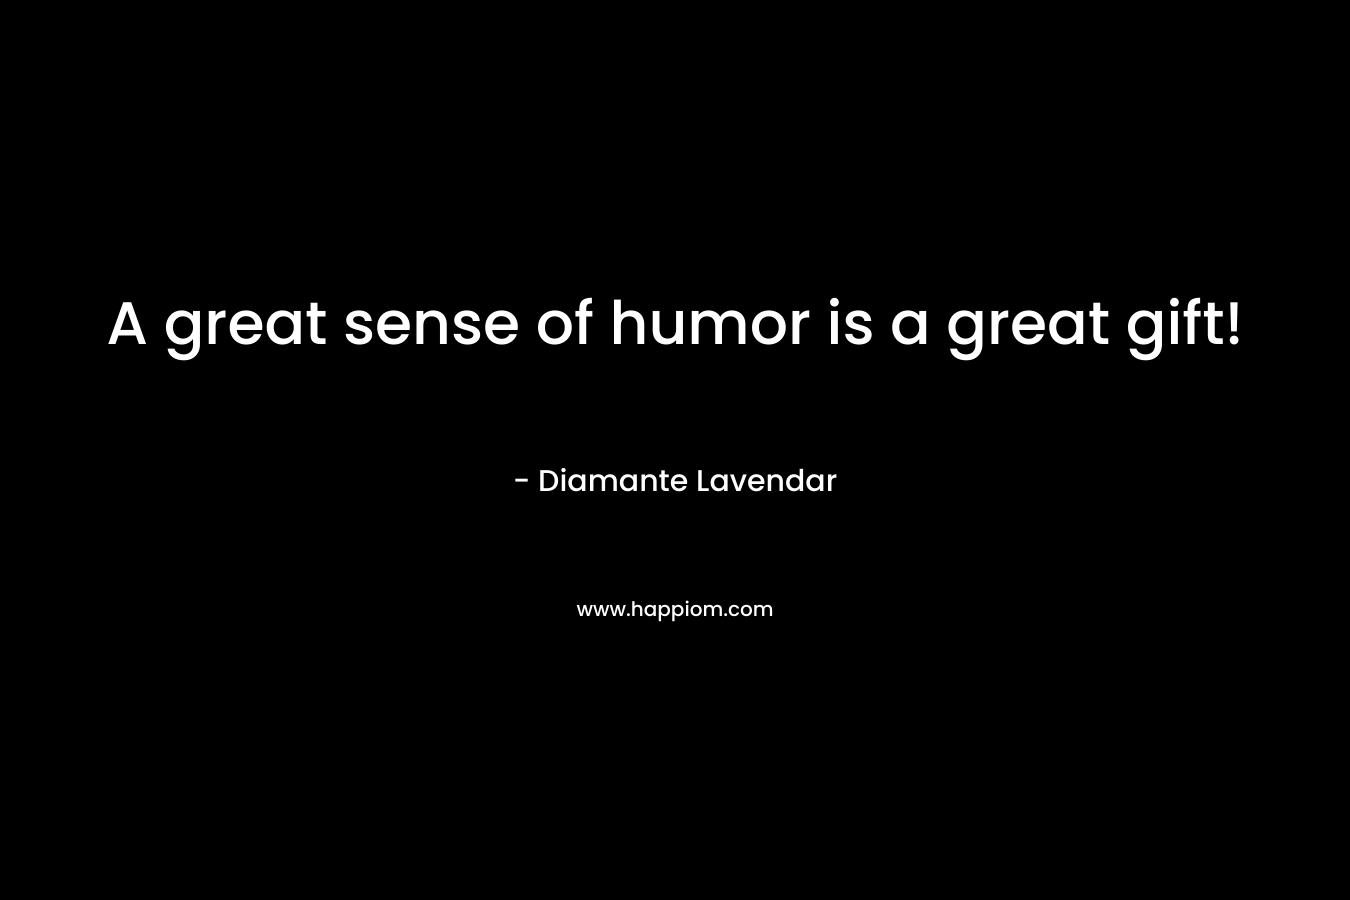 A great sense of humor is a great gift!